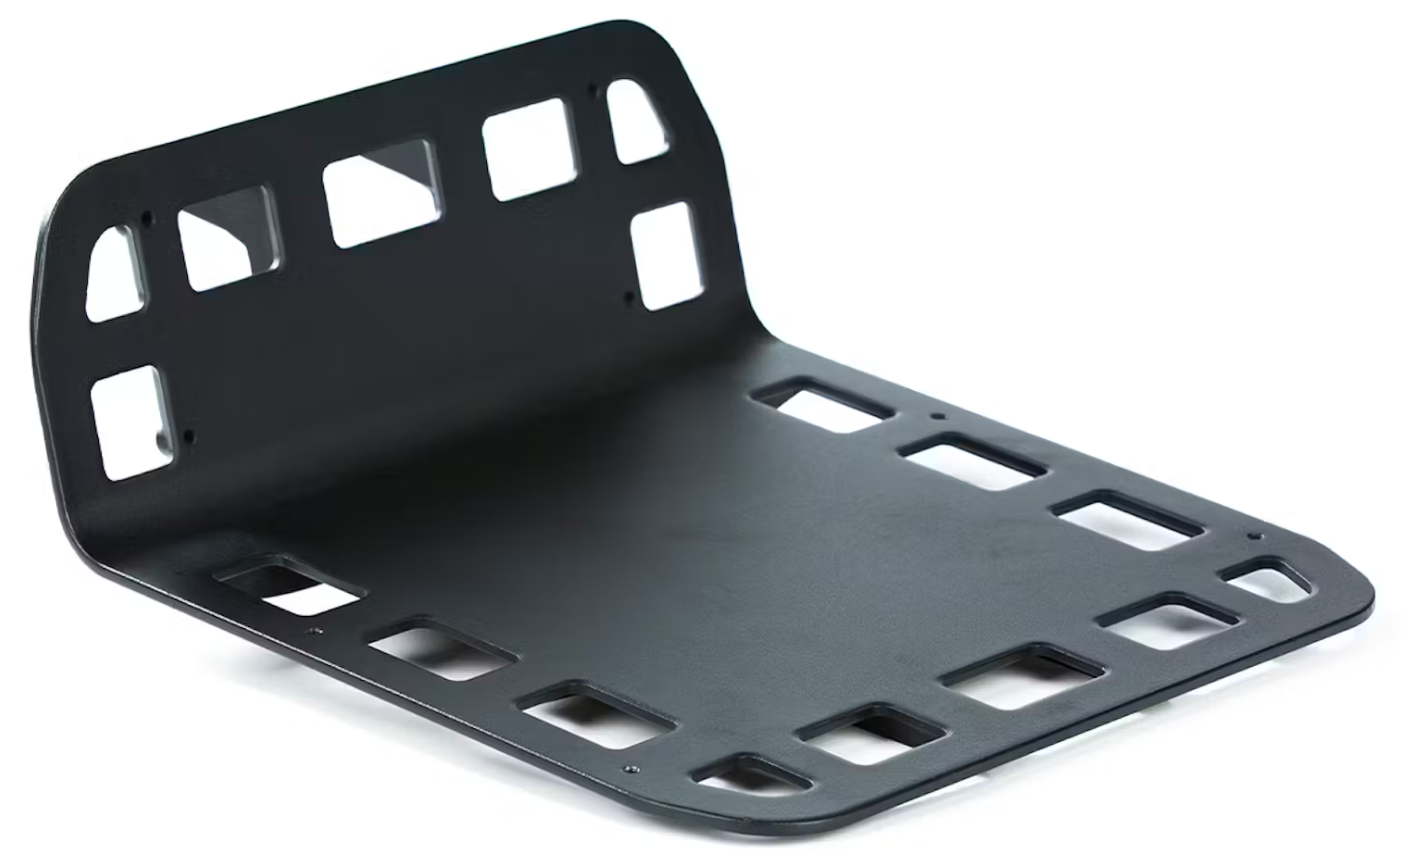 Black metal bracket with multiple rectangular cut-outs, designed for mounting Tampa Bay eBikes Aventon Front Utility Rack or support functions on front racks.